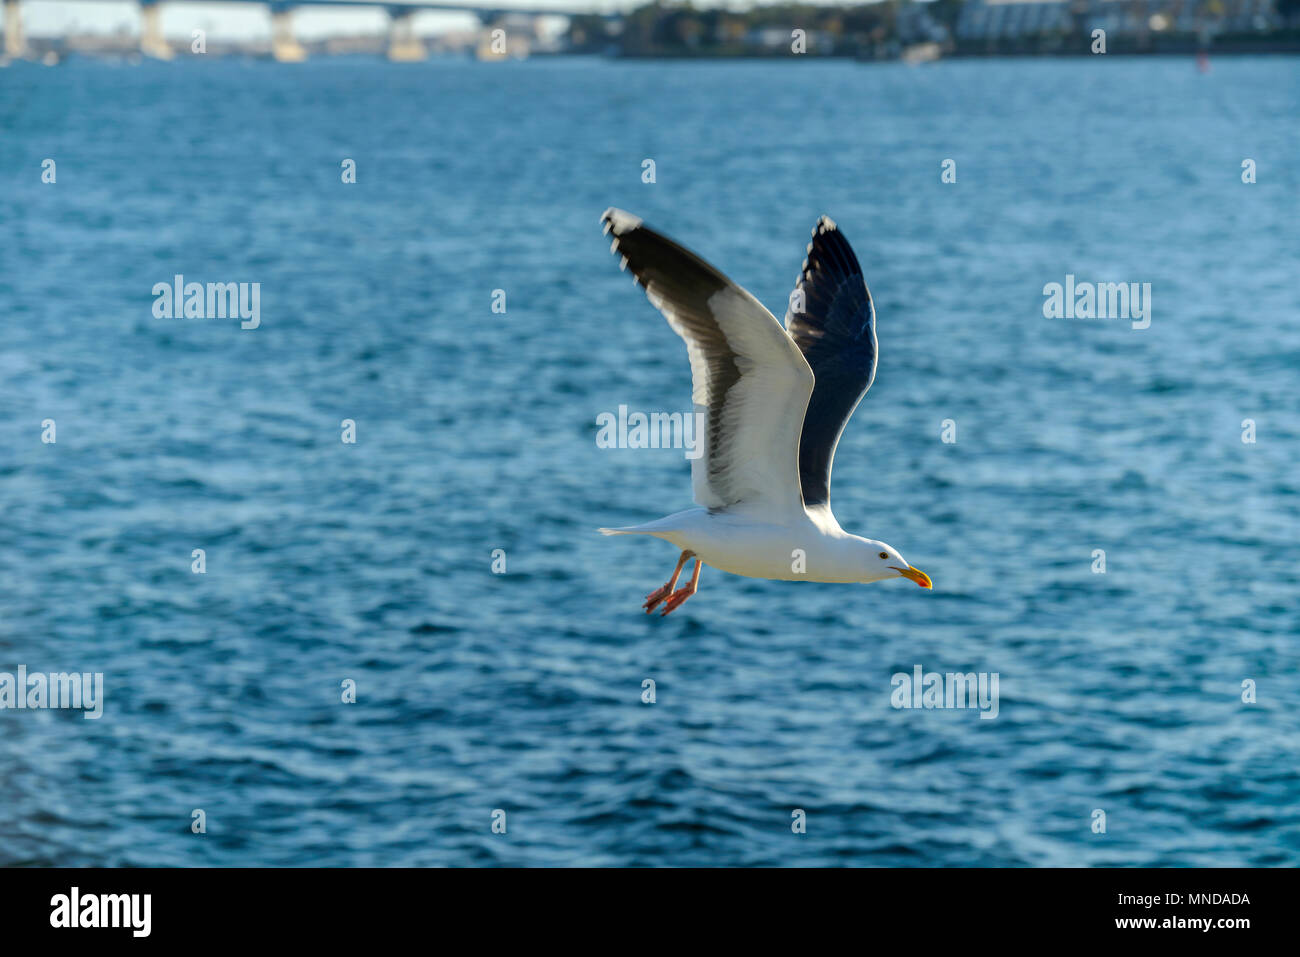 Seagull in Flight - A seagull flying low over water at San Diego Bay, with Coronado Bridge in the background. San Diego, California, USA. Stock Photo